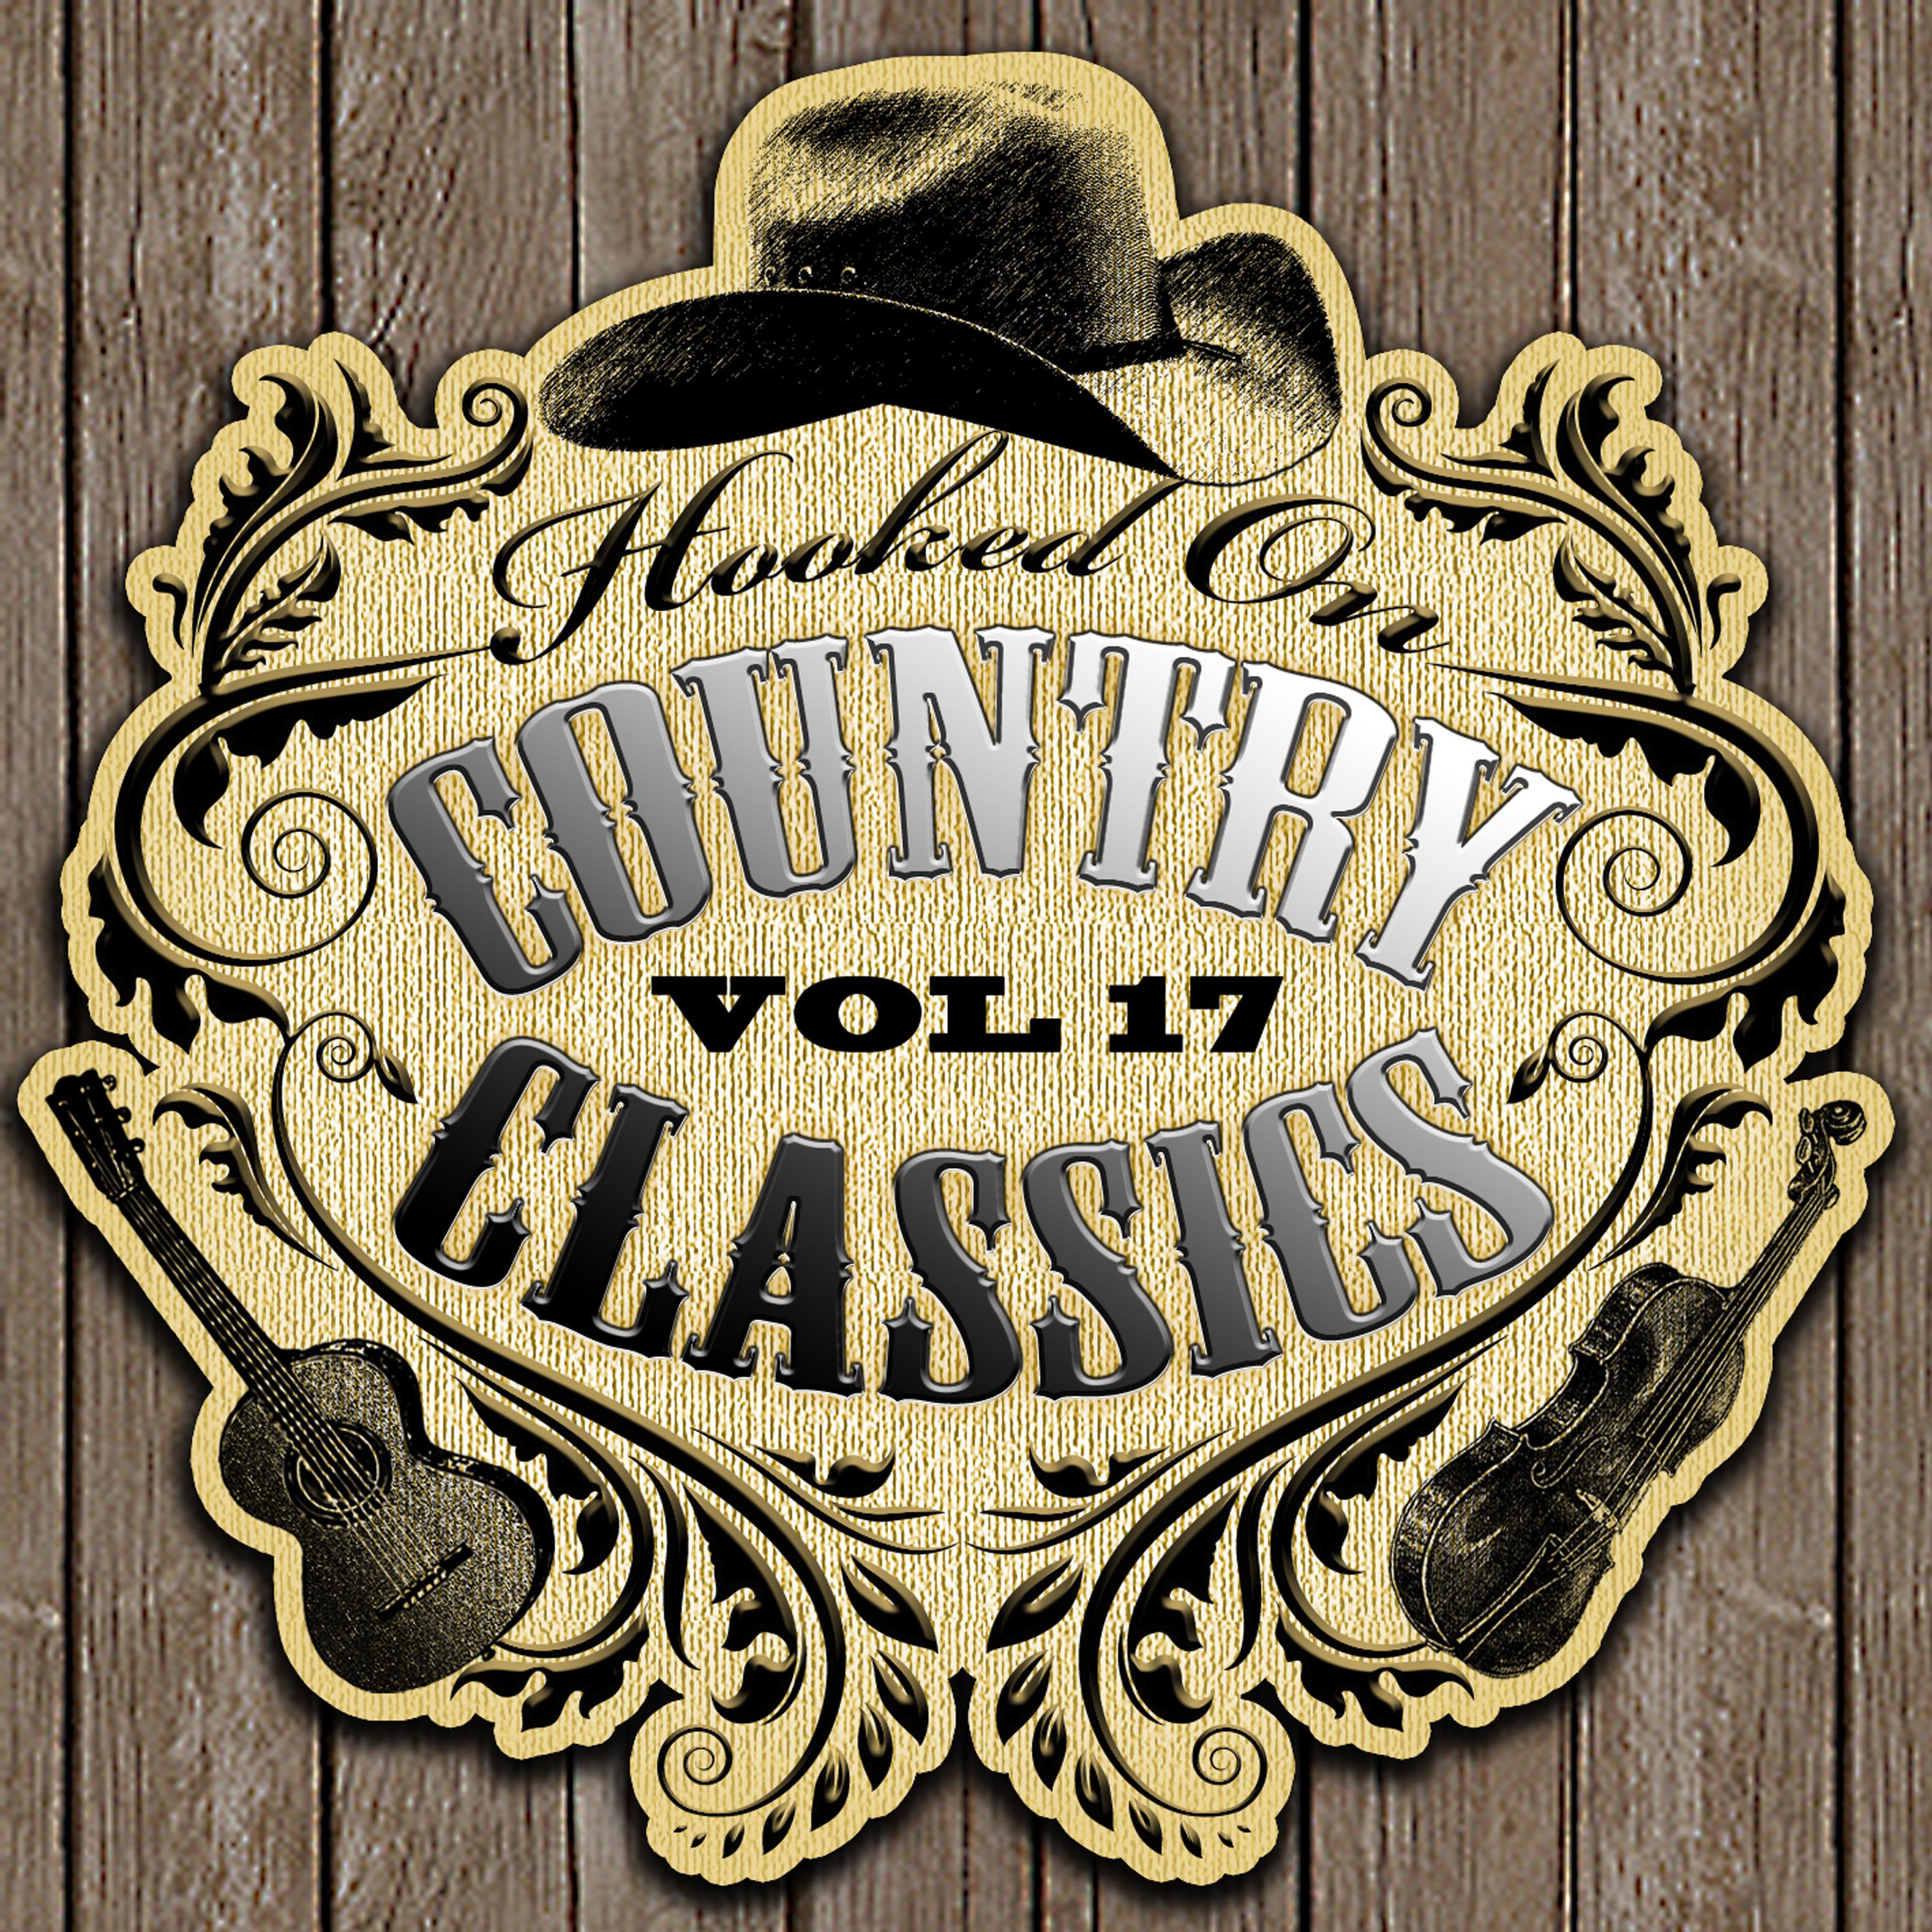 Hooked On Country Classics, Vol. 17